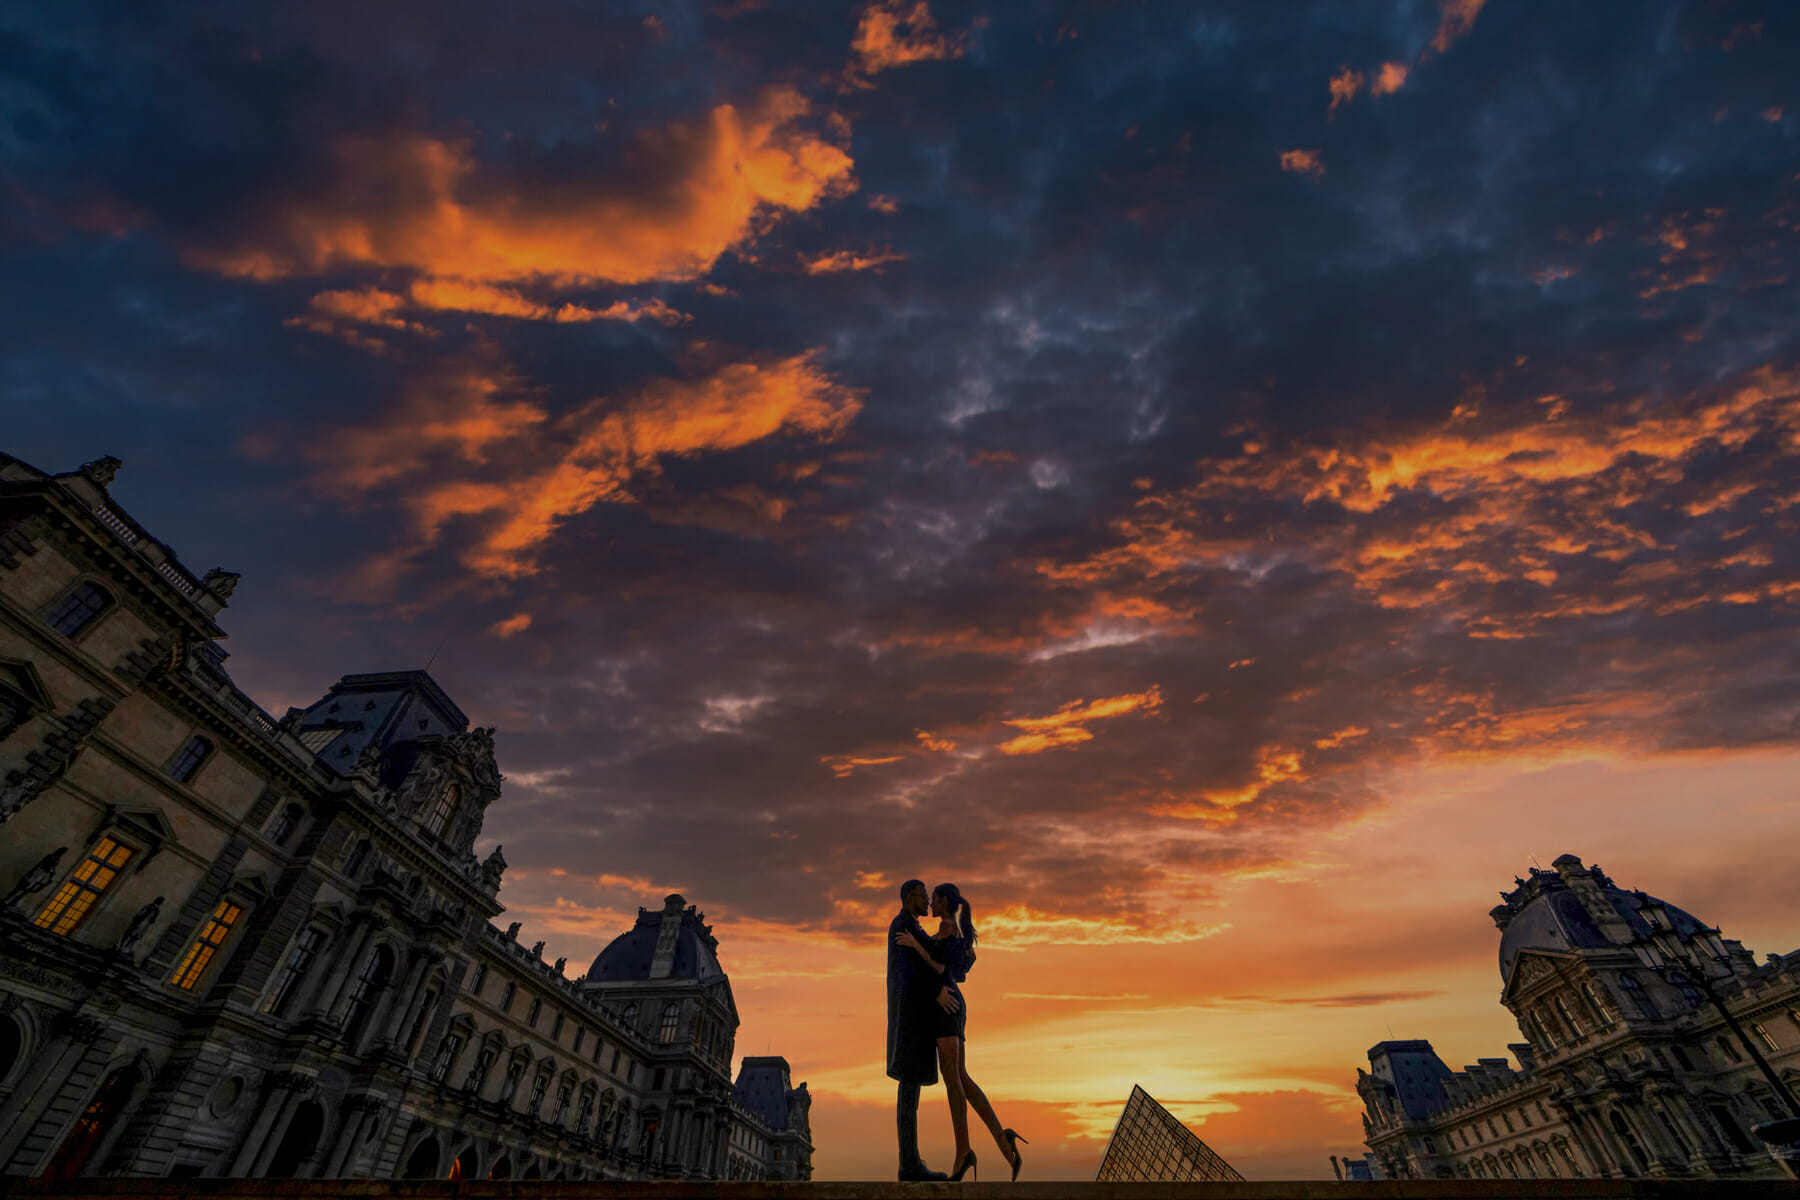 Best Photoshoot Locations in Paris: the Louvre by Night